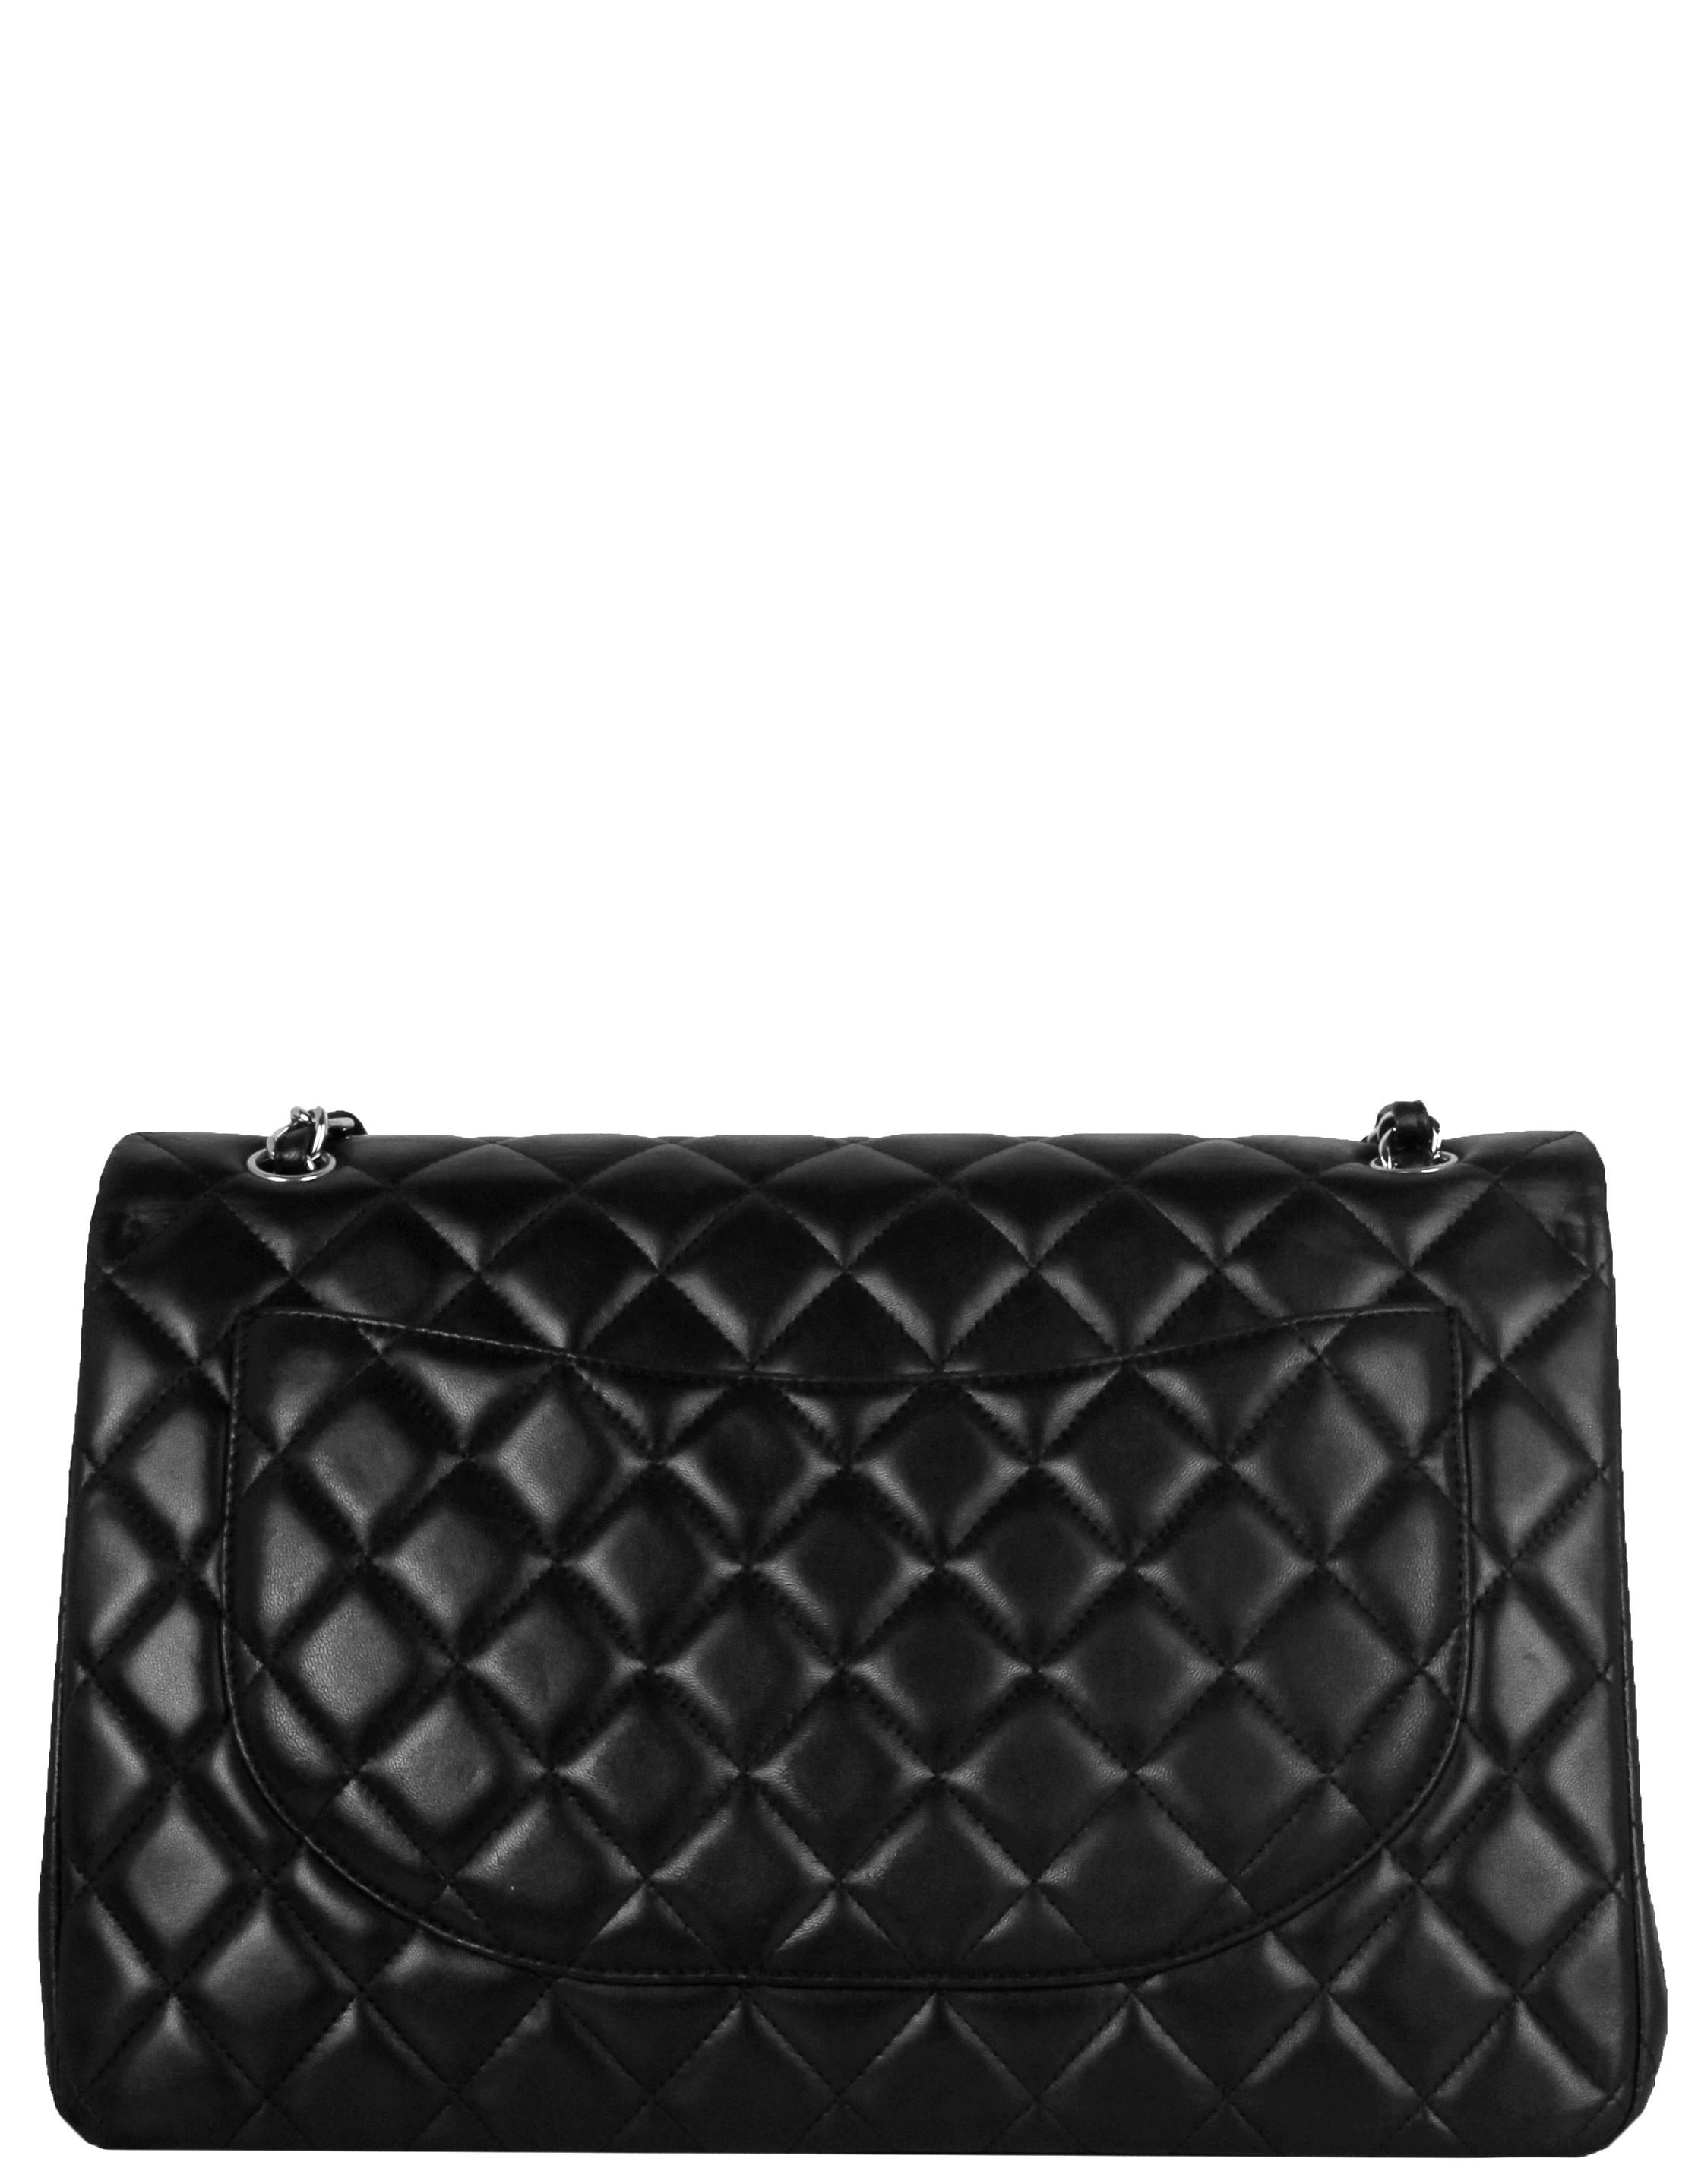 Chanel Black Lambskin Leather Quilted Single Flap Maxi Bag For Sale 5